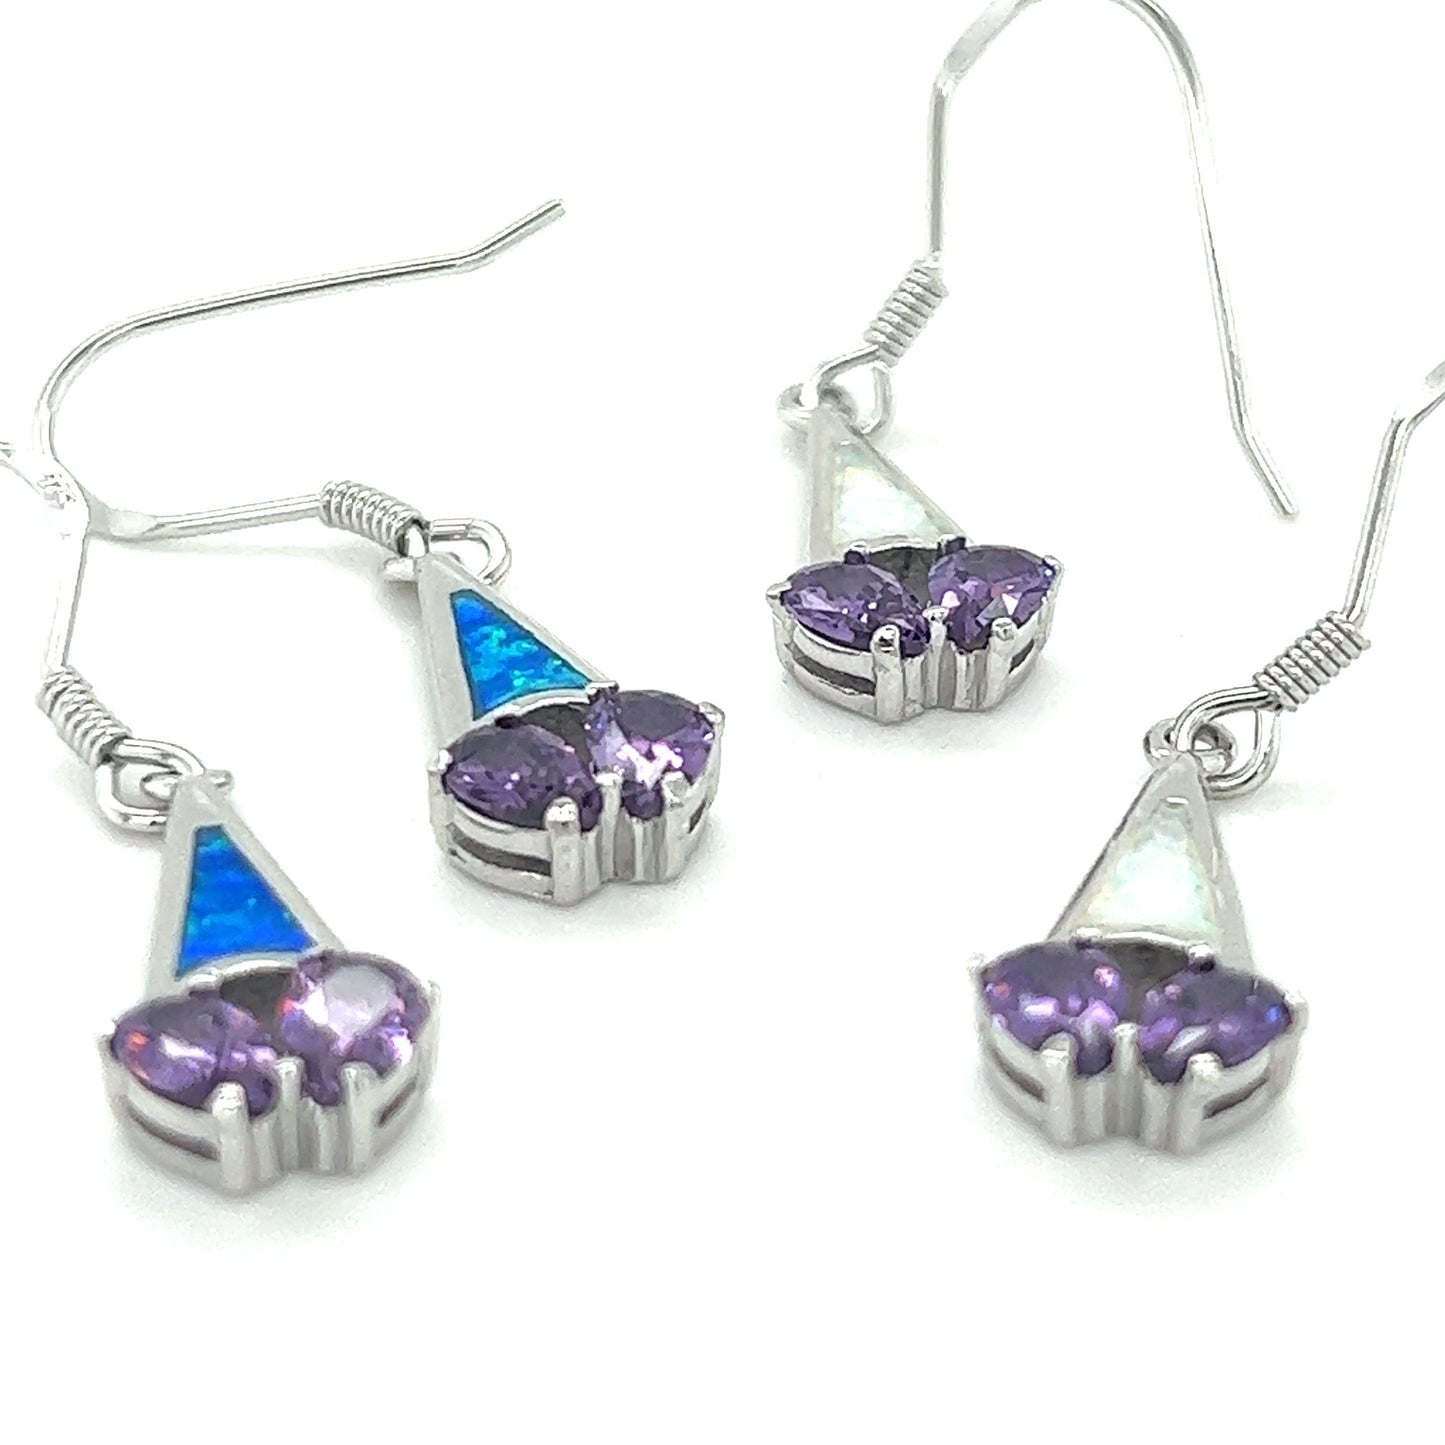 A pair of Created Opal Earrings with purple Cubic Zirconia, adorned with a rhodium-plated finish by Super Silver.